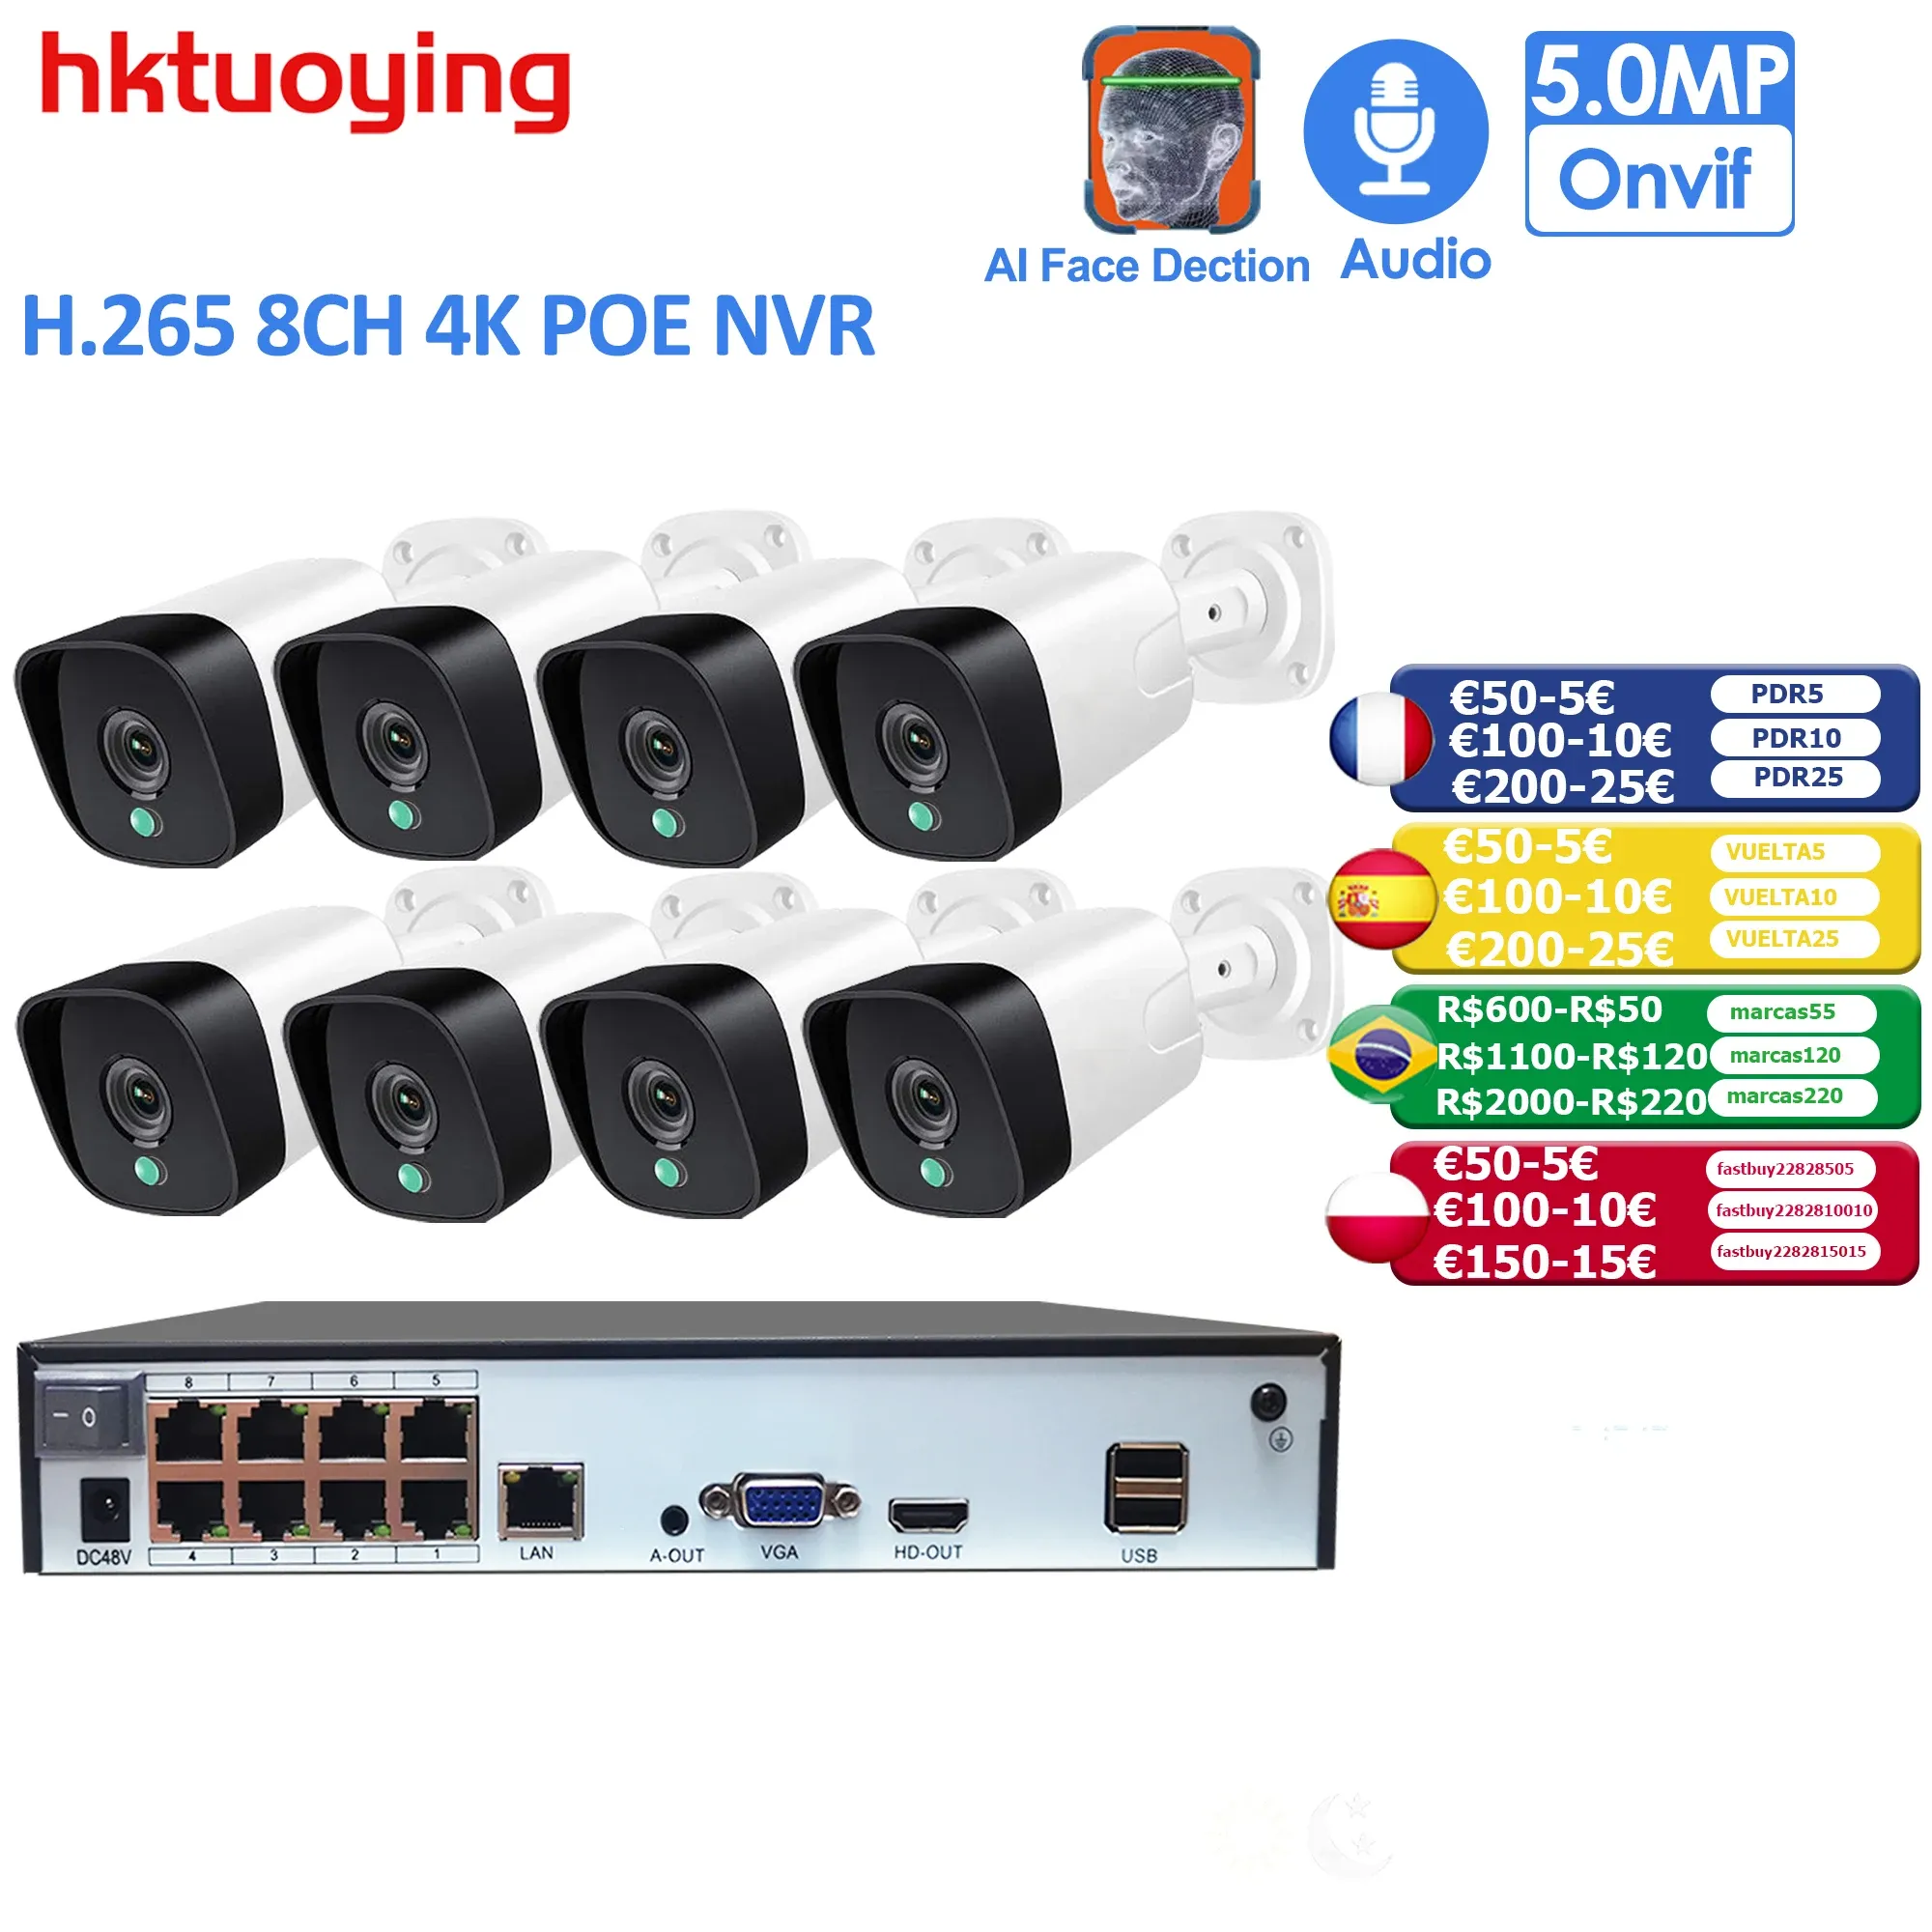 System H.265+ 8CH 5MP POE Security Camera NVR System Kit Audio Record RJ45 IP -камера ИК